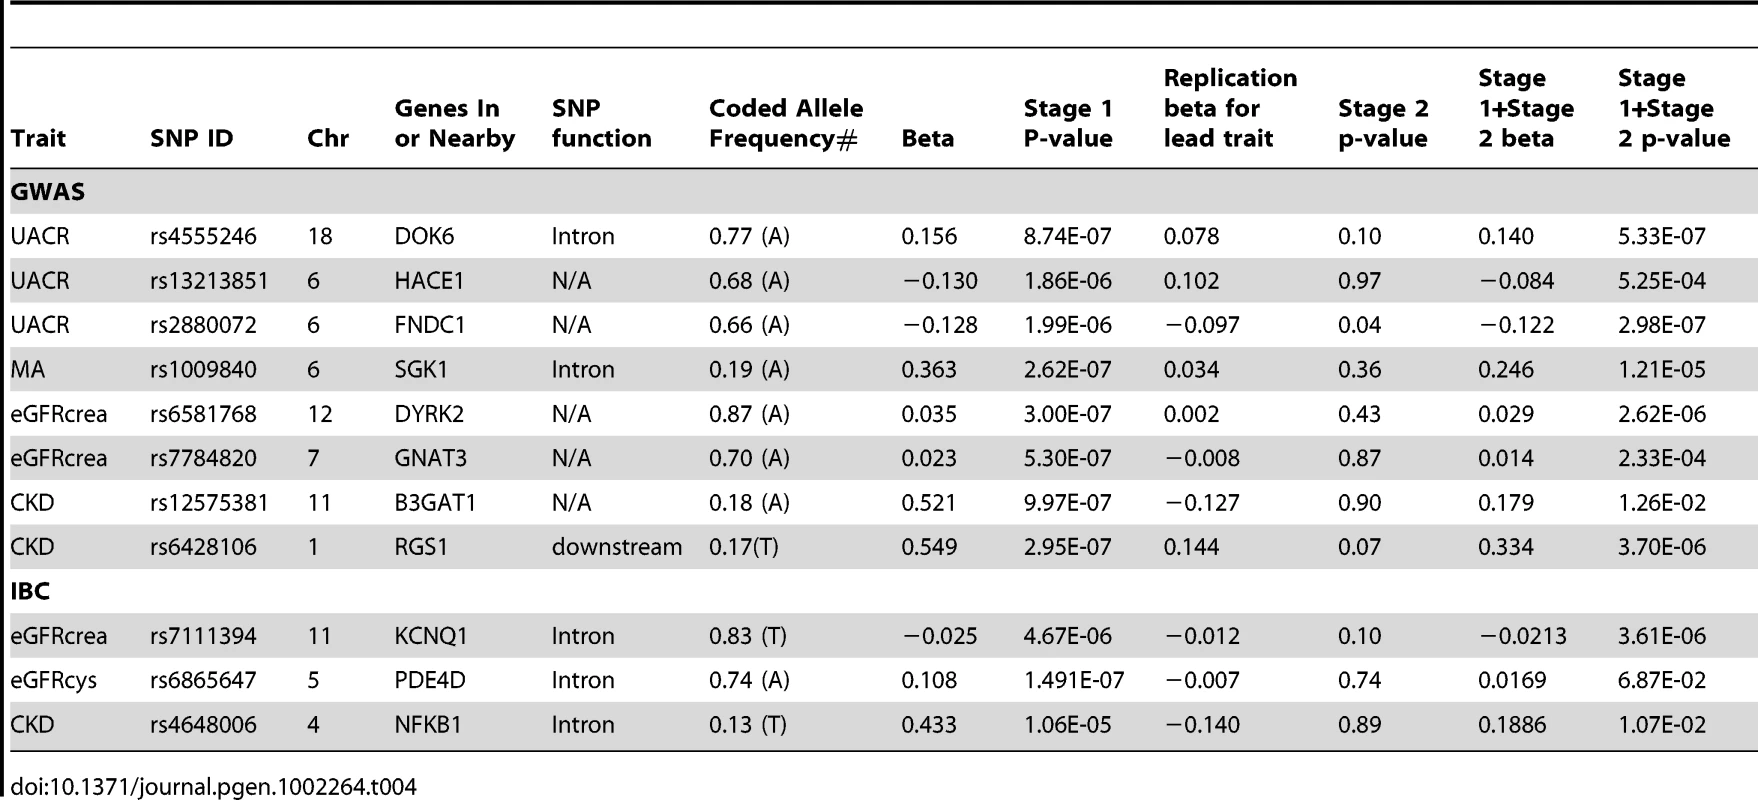 Stage 1 and Stage 2 results from loci in African Americans from GWAS (p&amp;lt;5.0*10E-06): SNP association with renal traits.